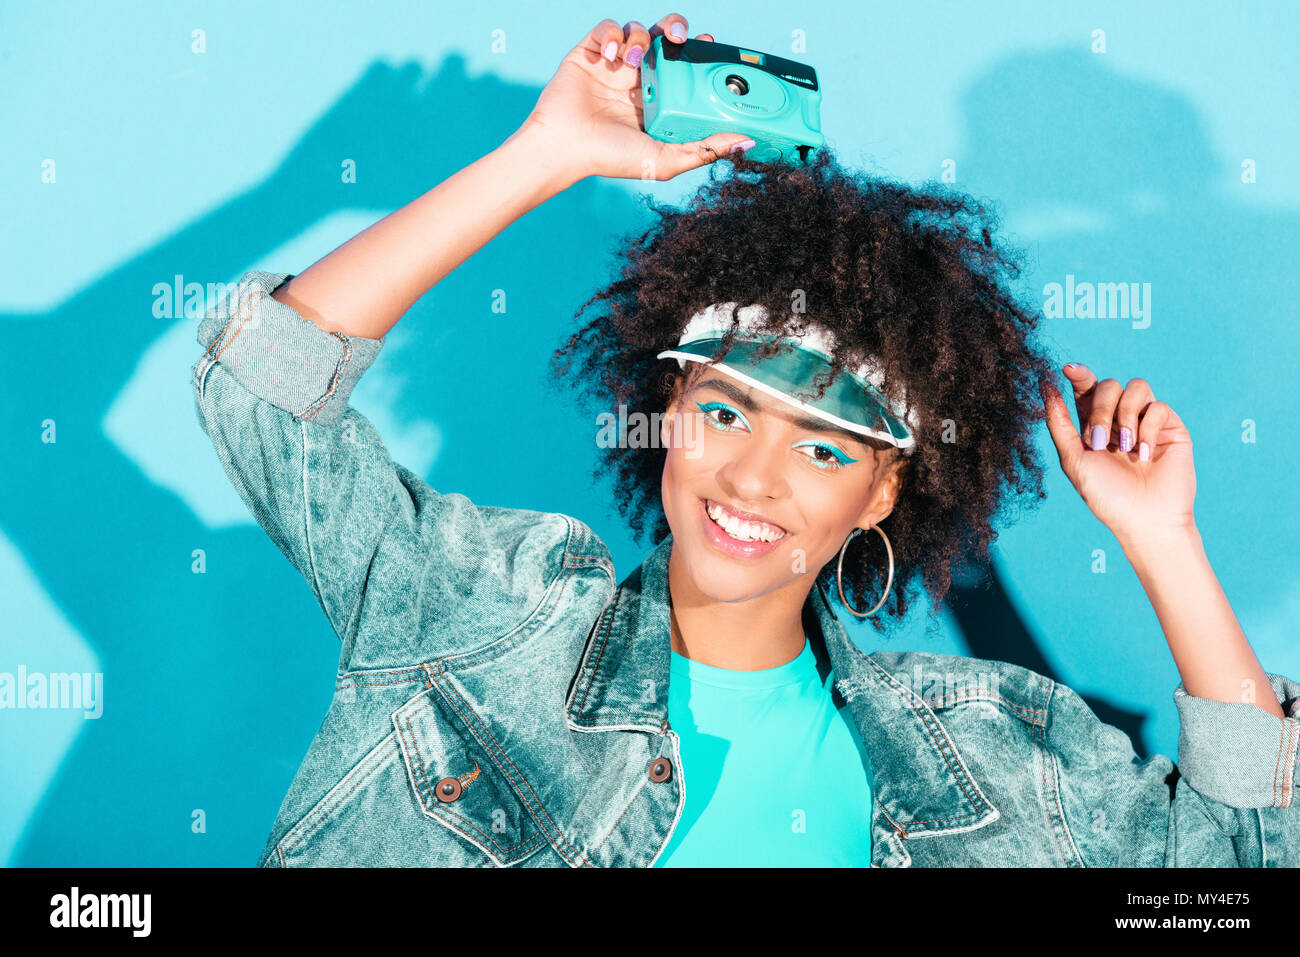 beautiful afro model posing in jeans jacket with vintage photo camera, on turquoise Stock Photo